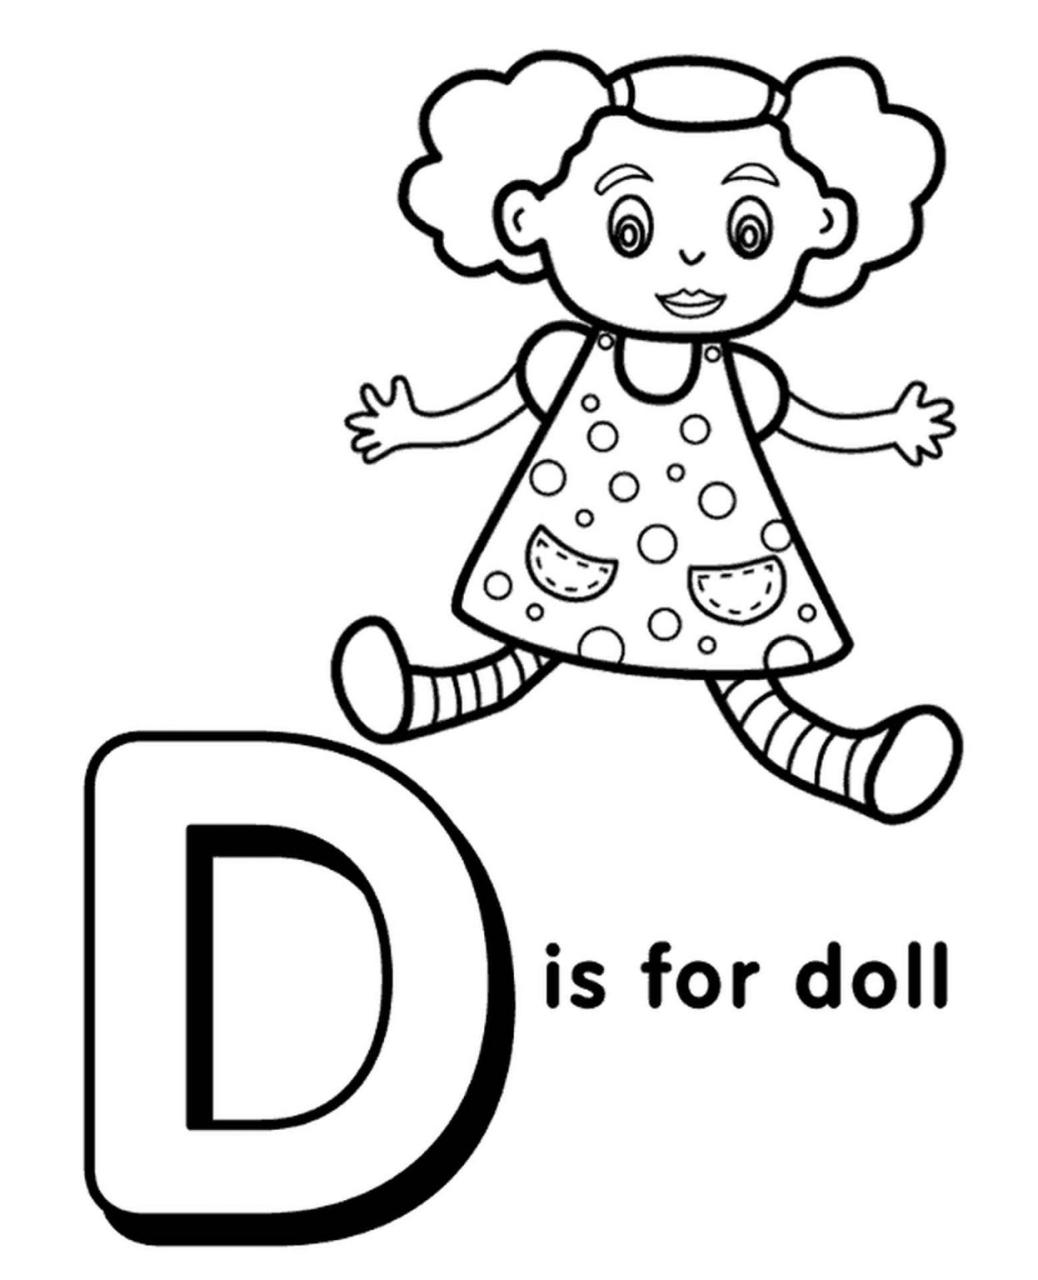 Letter D Coloring Page For Kids to Print and Download